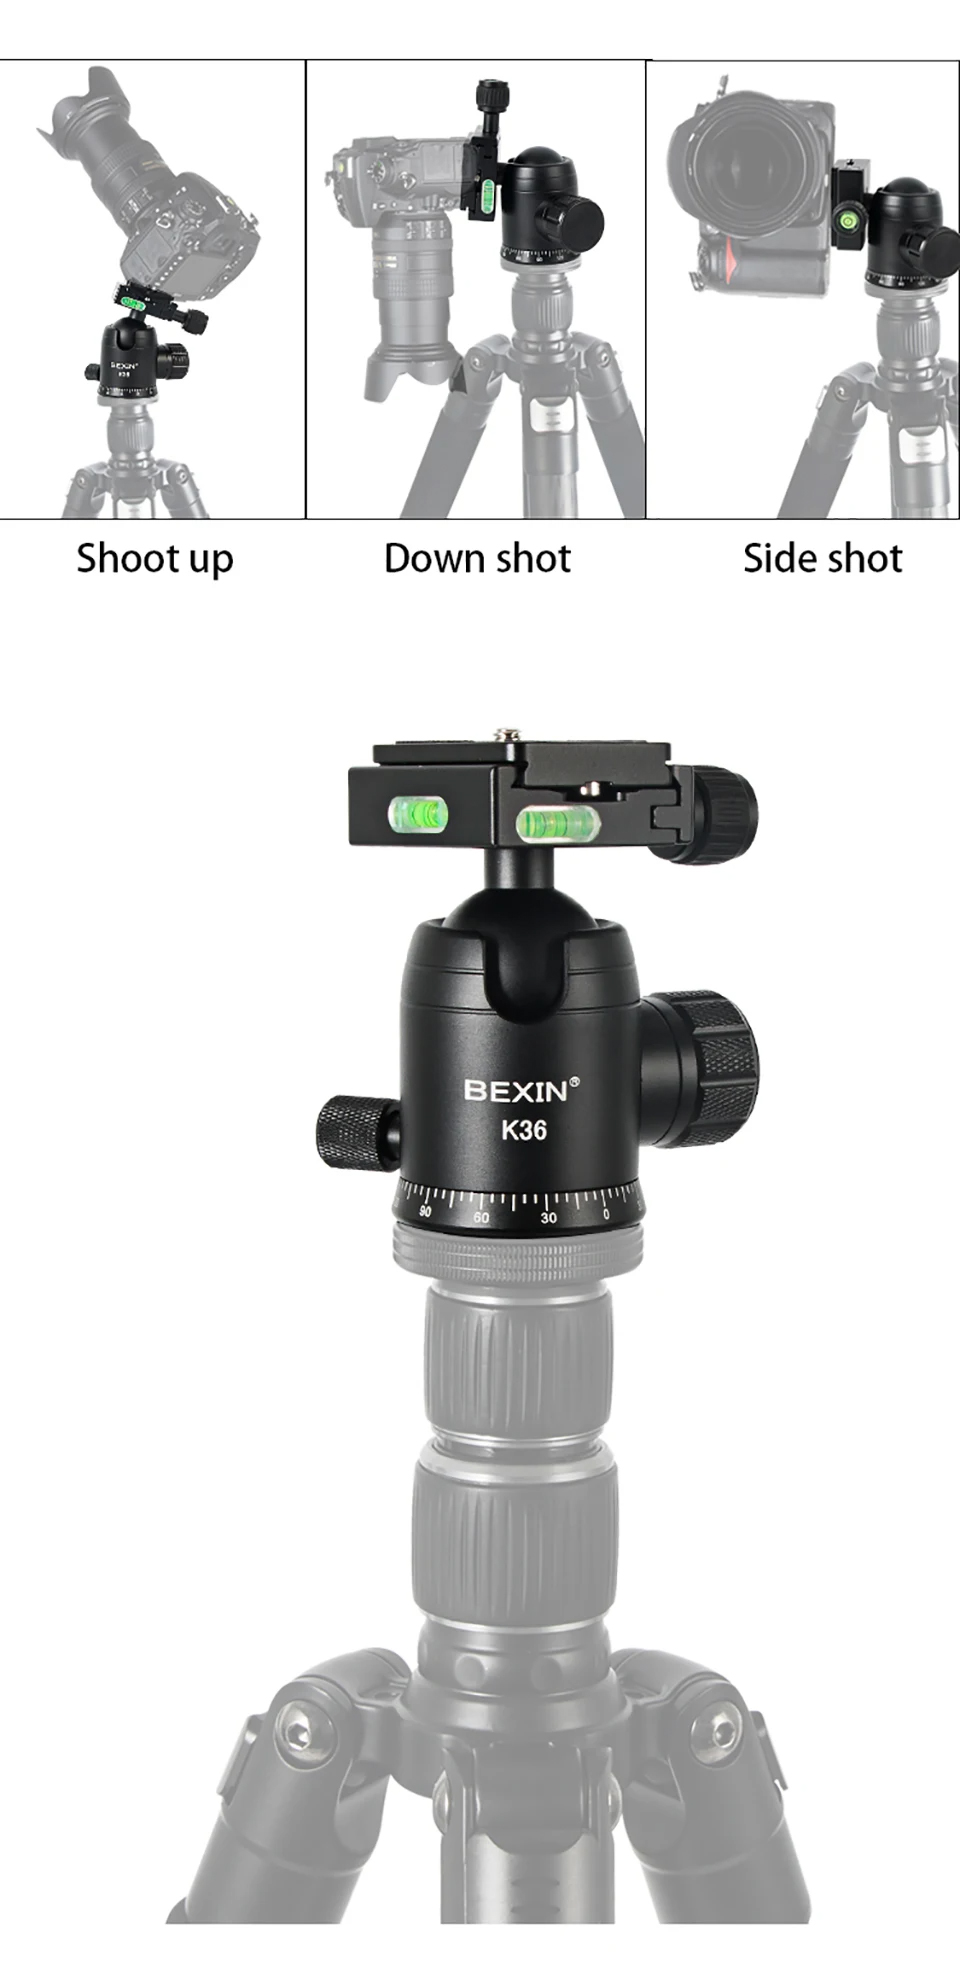 BEXIN K36 Panoramic Ball Head 360 Degree Rotation with Damping for SLR Camera (8)8mt